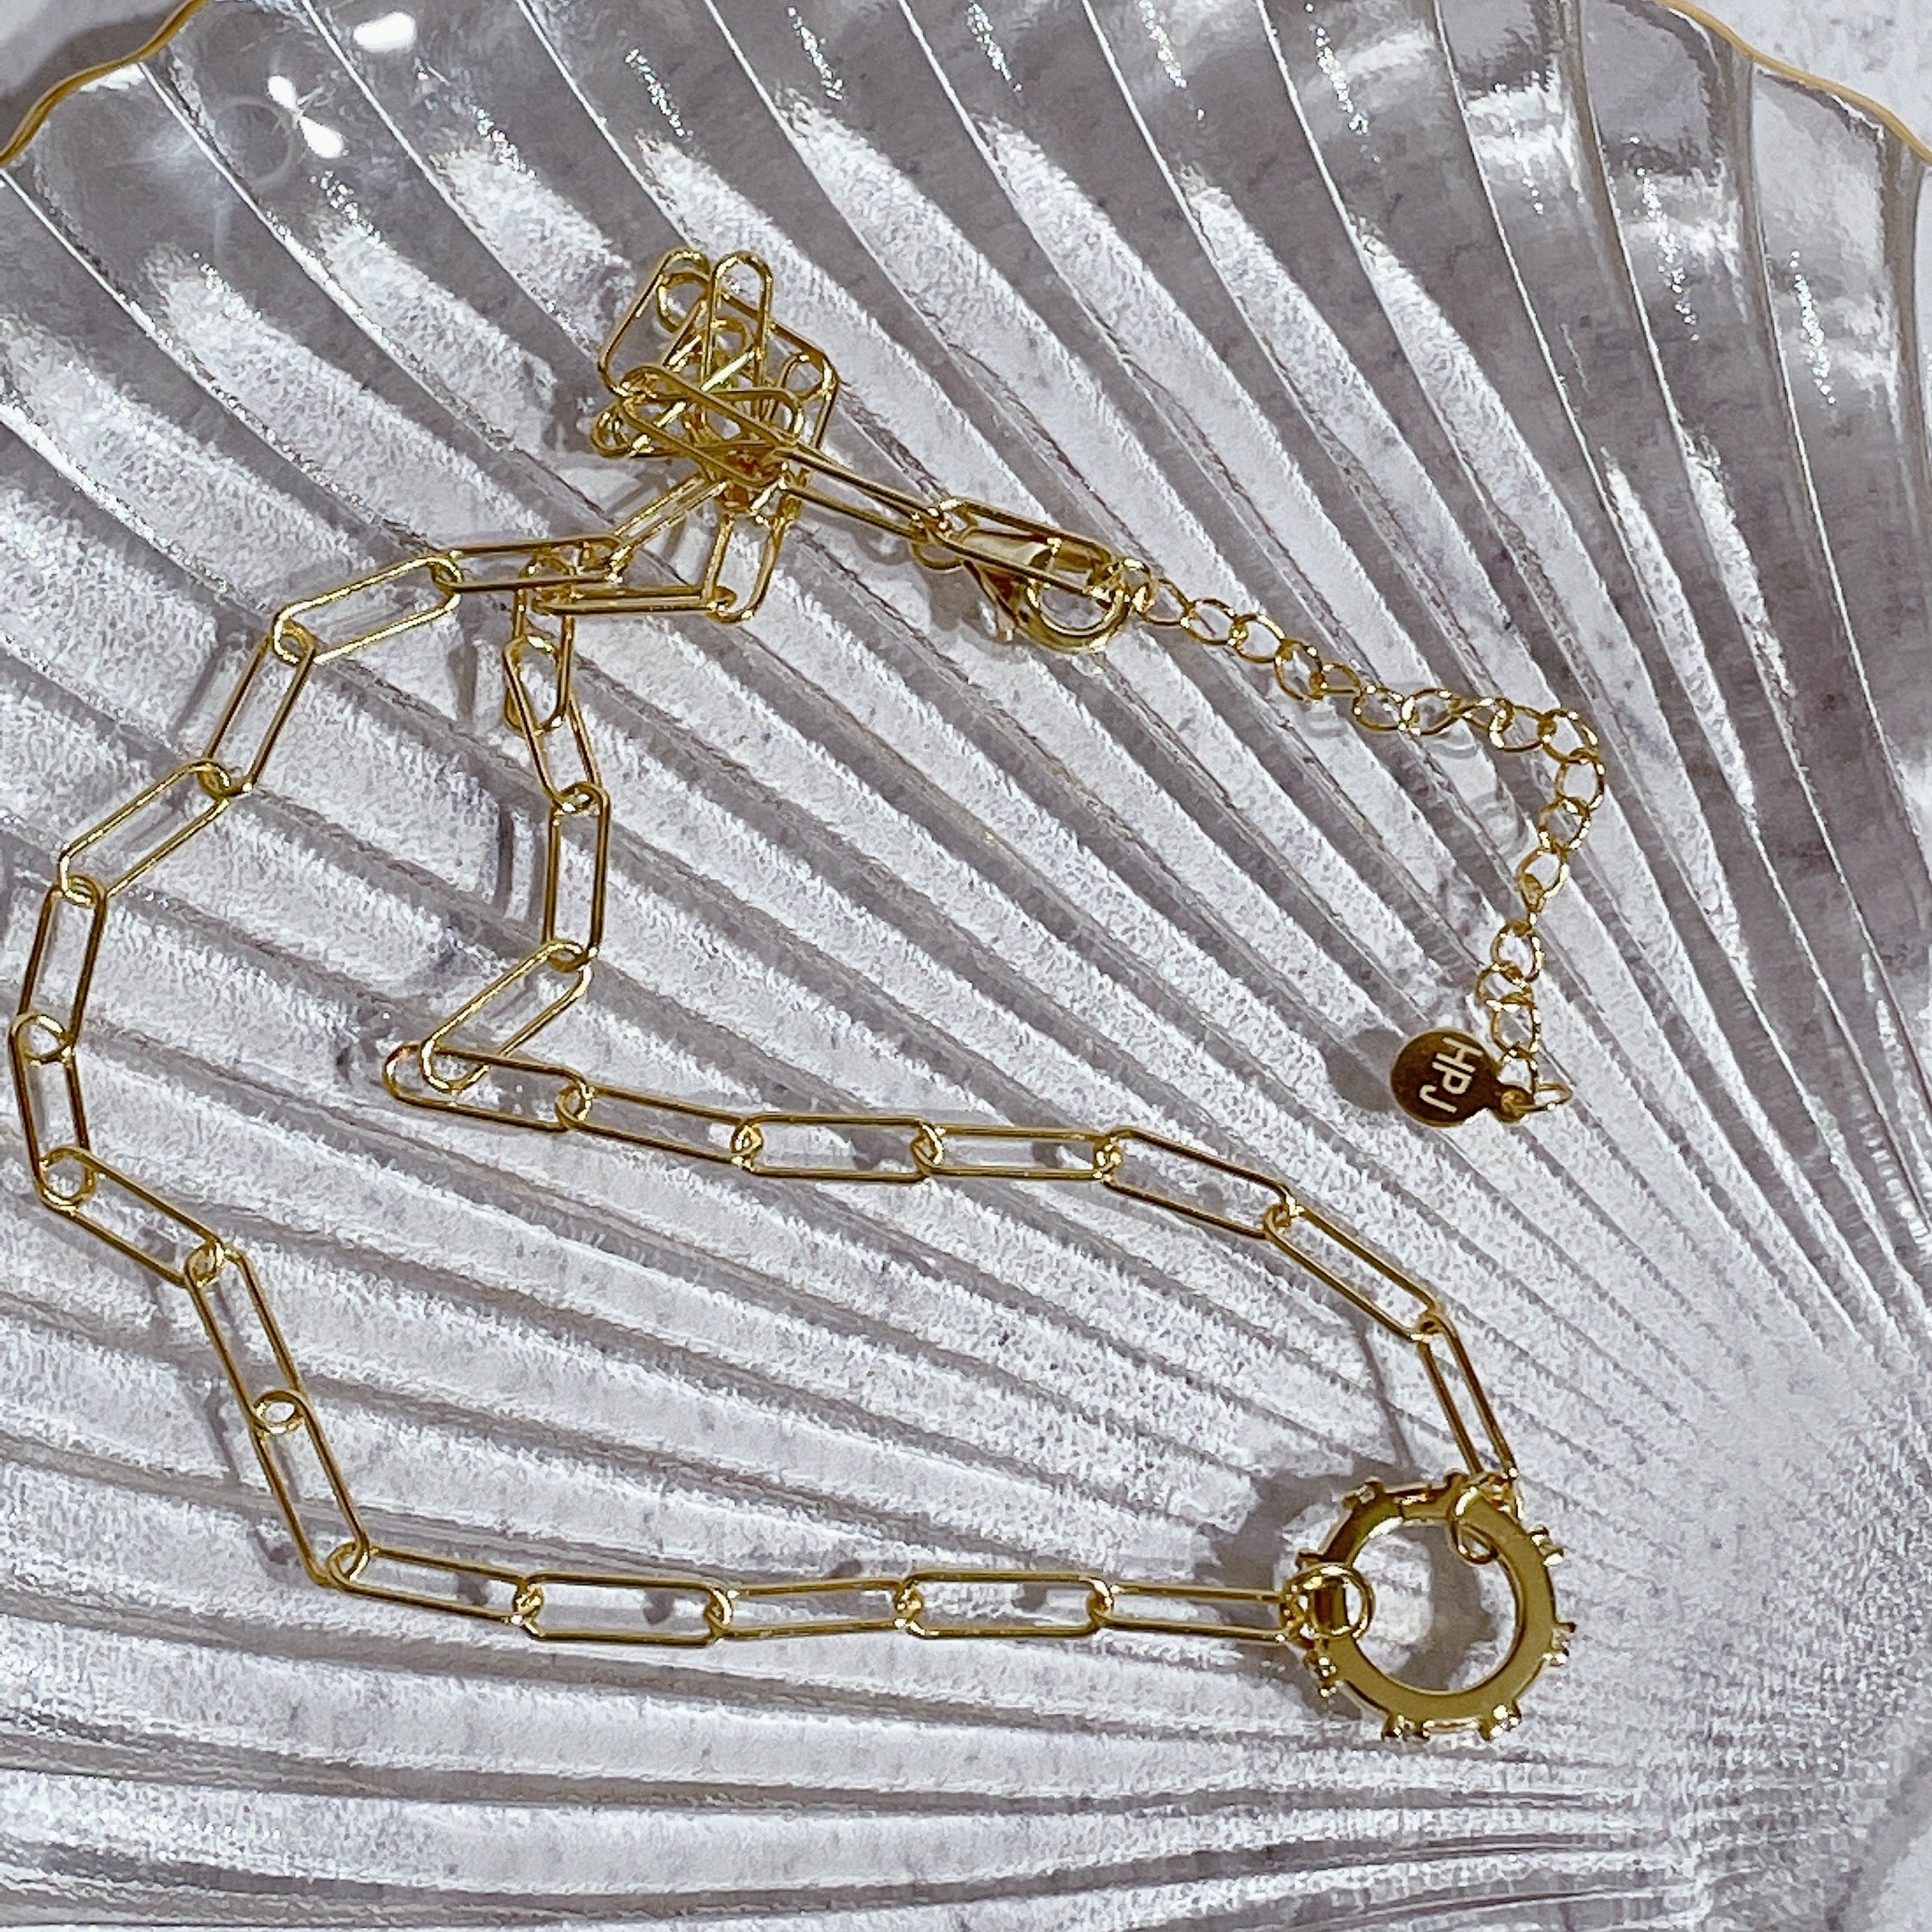 CHARIOT Necklace | Gold